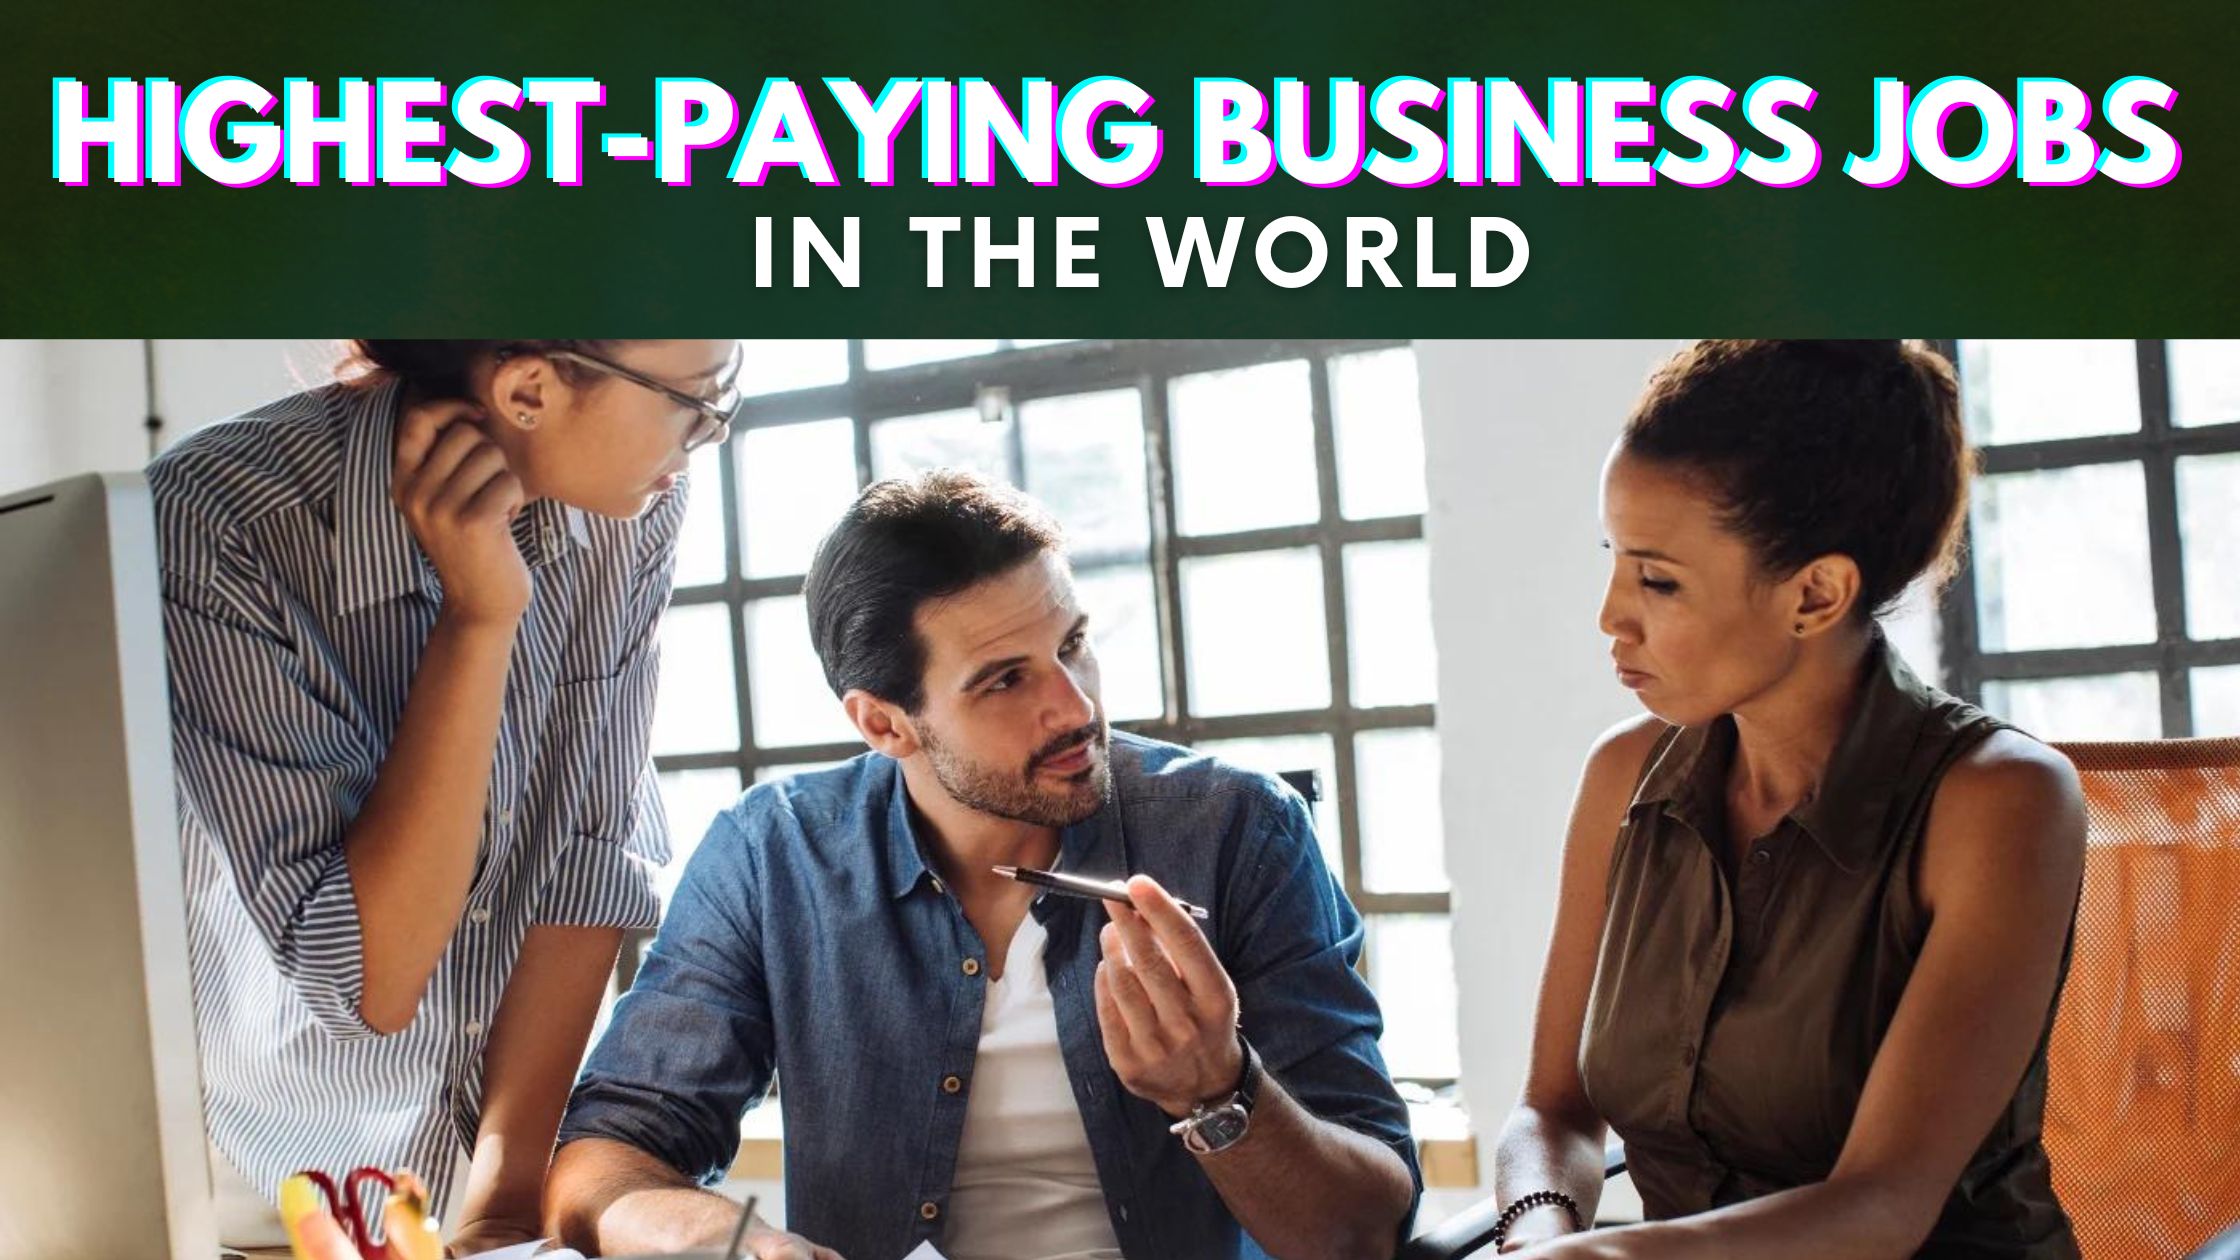 Highest-Paying Business Jobs in the World